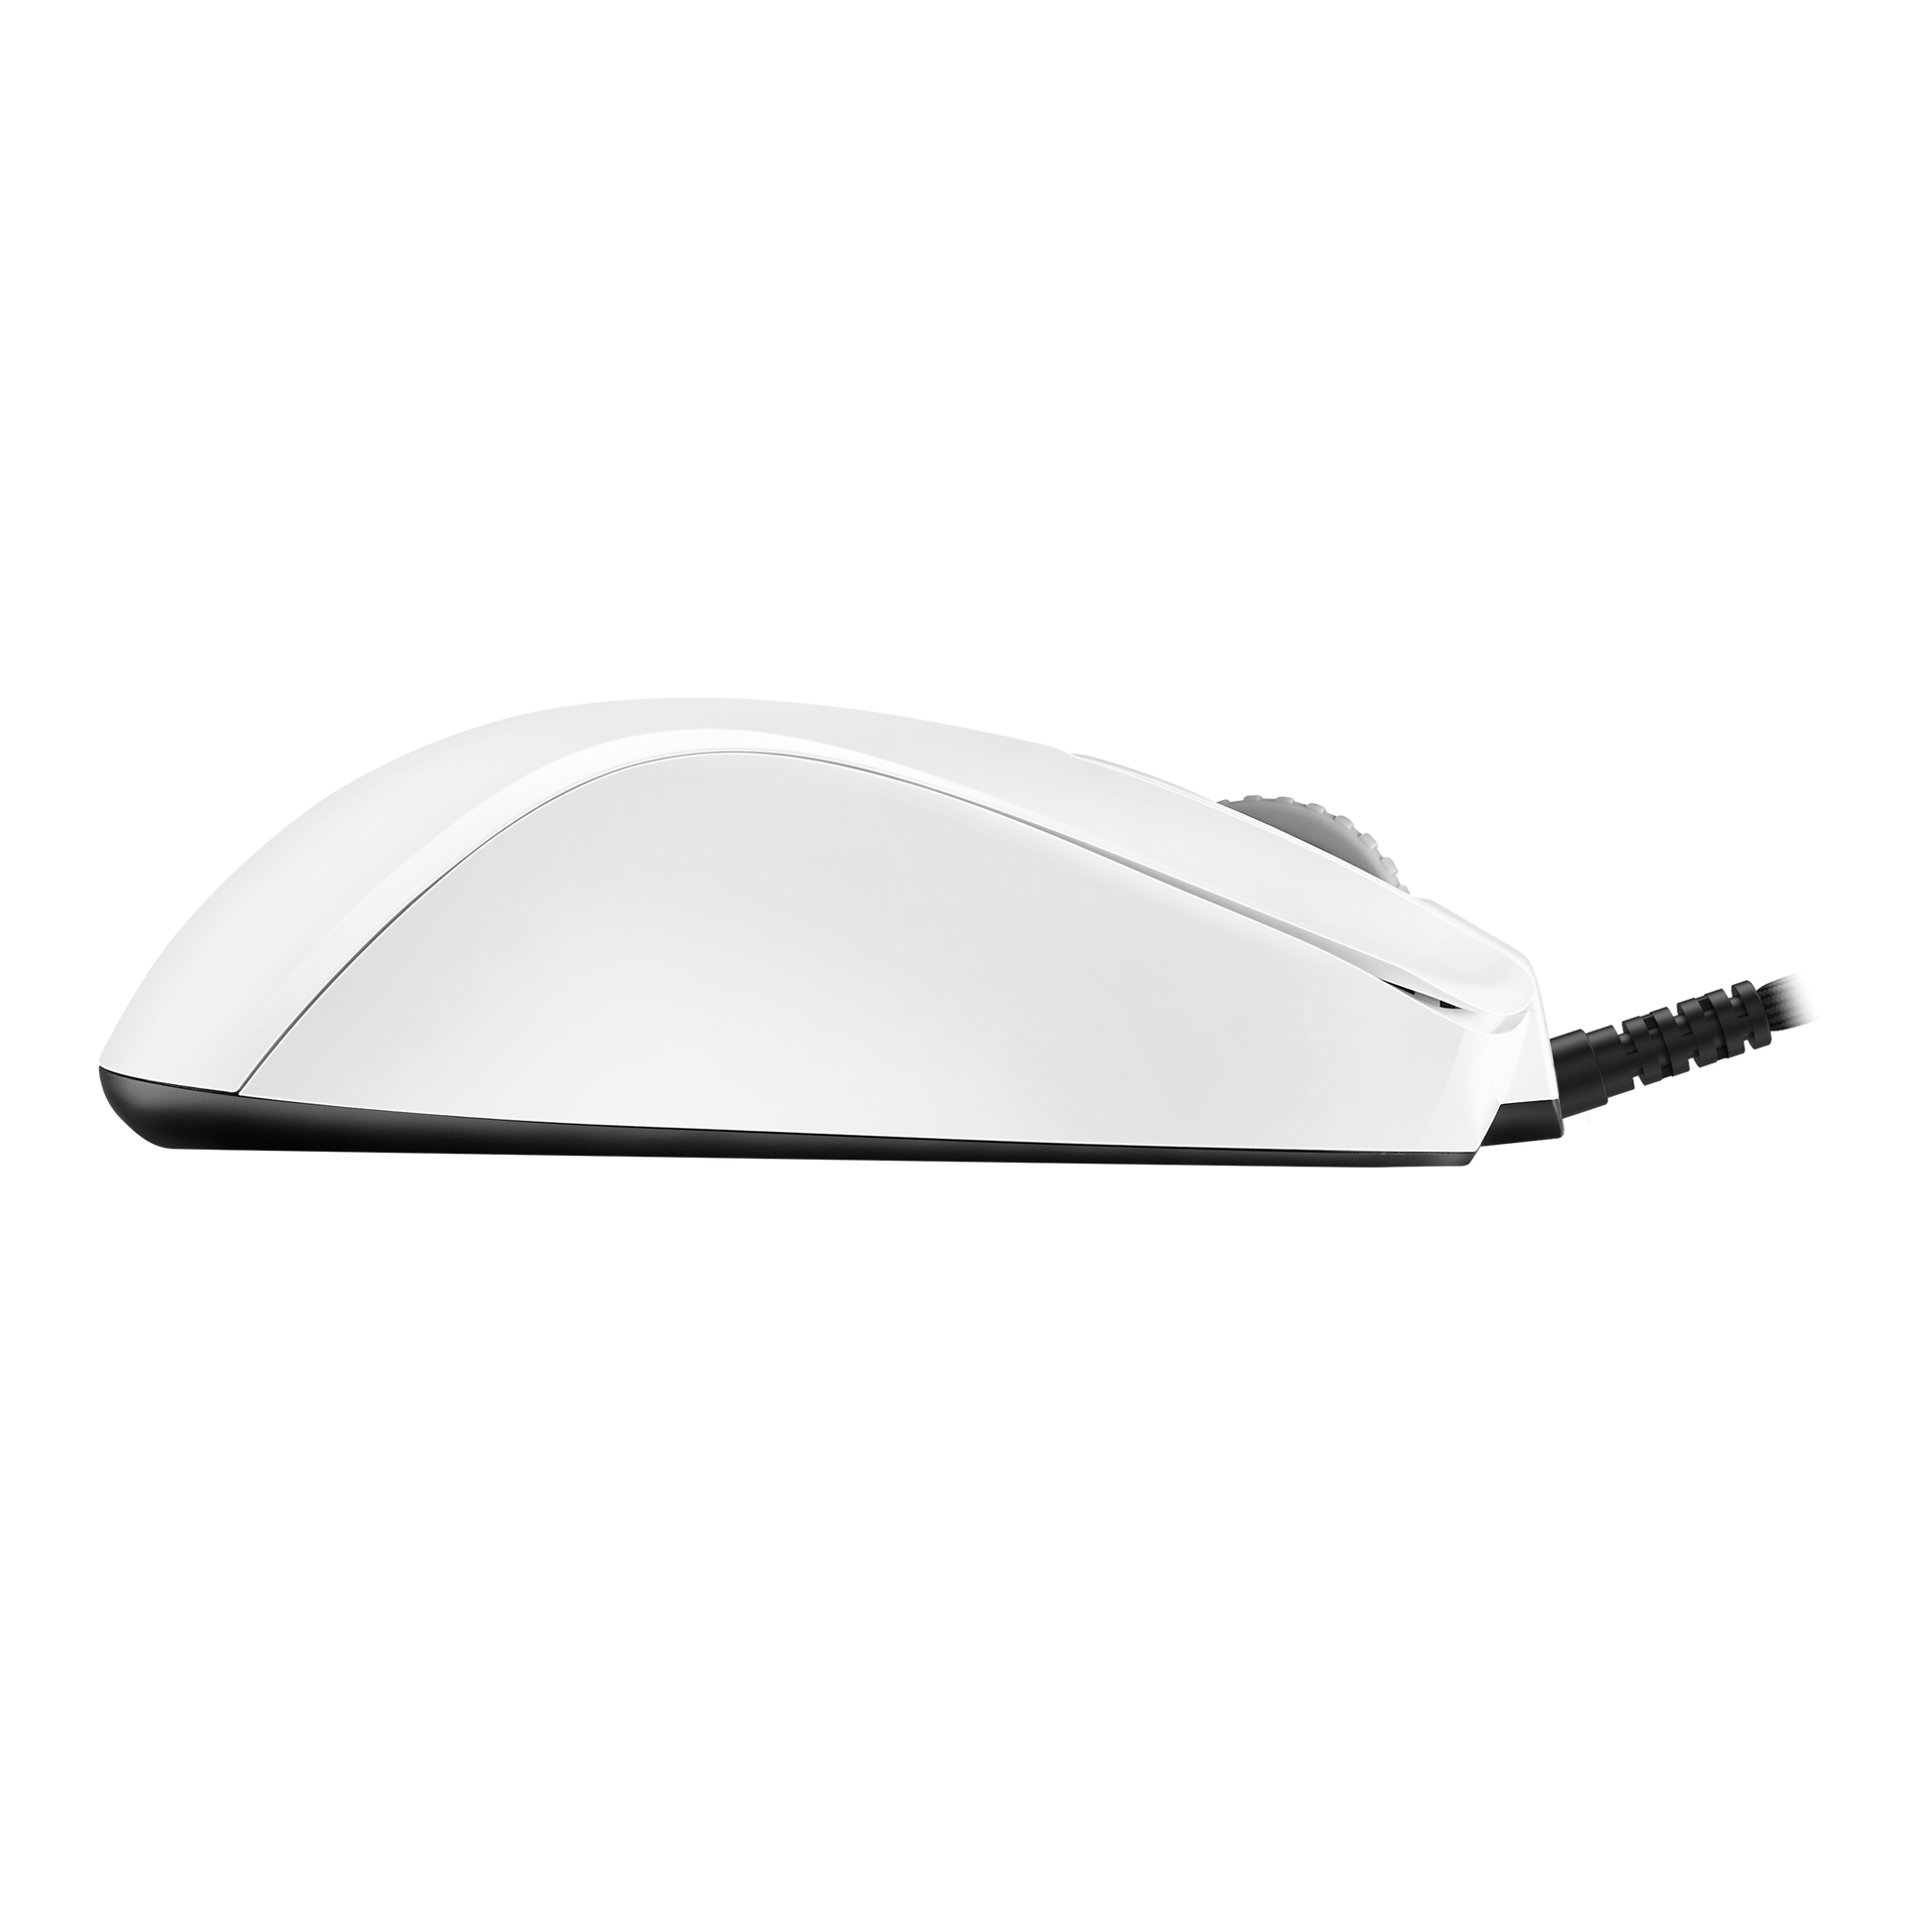 BenQ Zowie S2 White Edition V2 Mouse for eSports Addice Inc